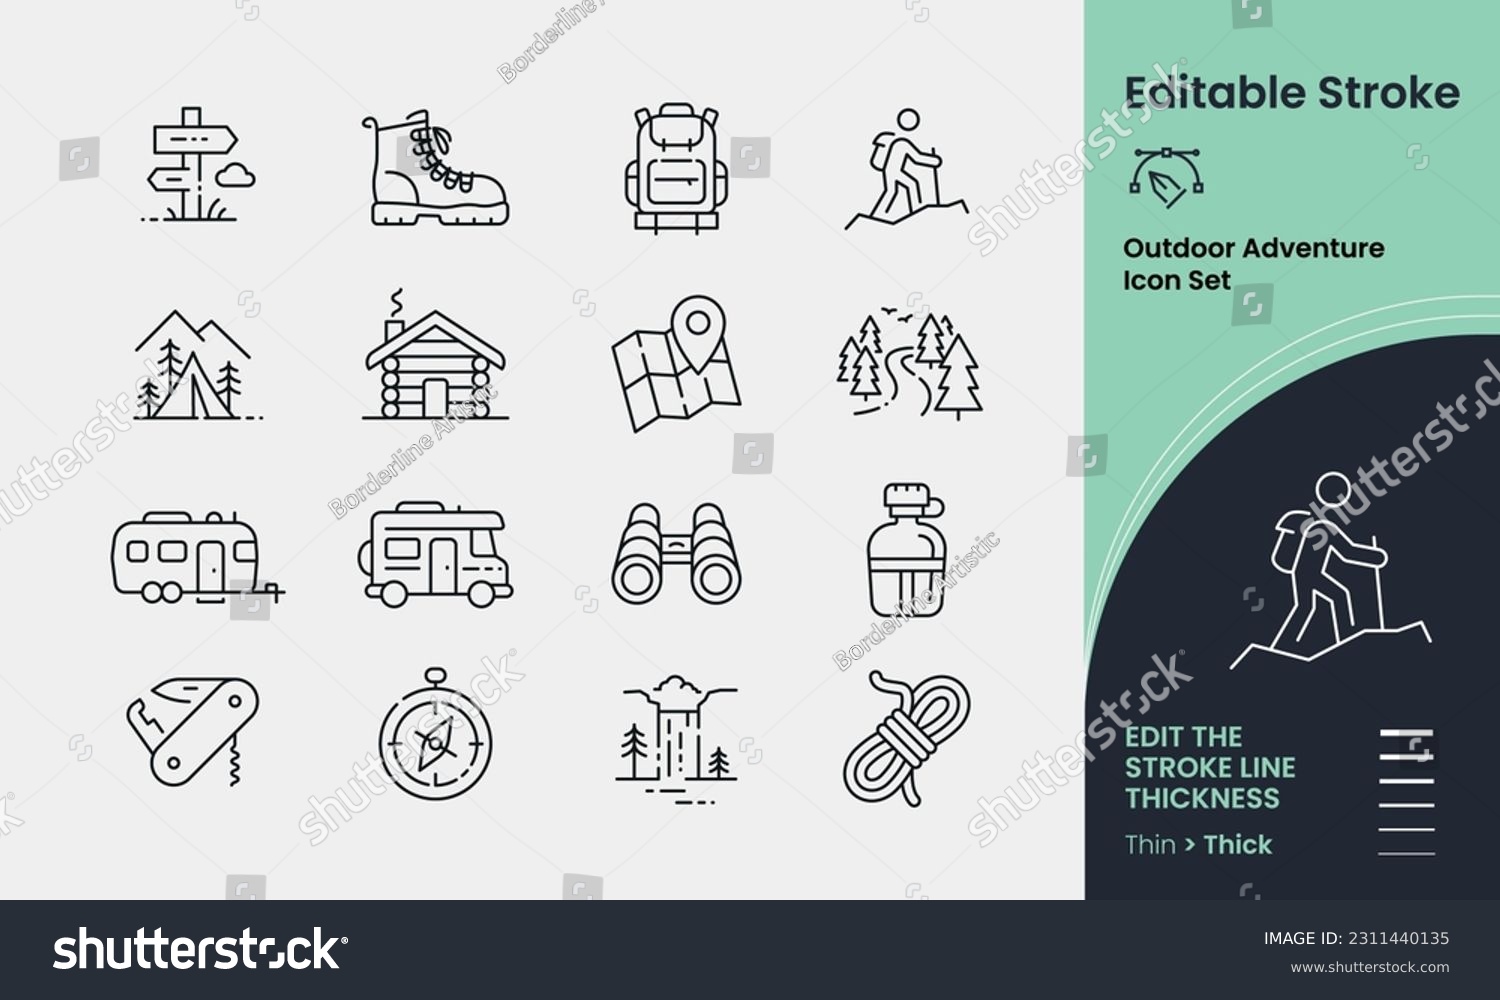 Outdoor Adventure Icon collection containing 16 editable stroke icons. Perfect for logos, stats and infographics. Edit the thickness of the line in any vector capable app. #2311440135